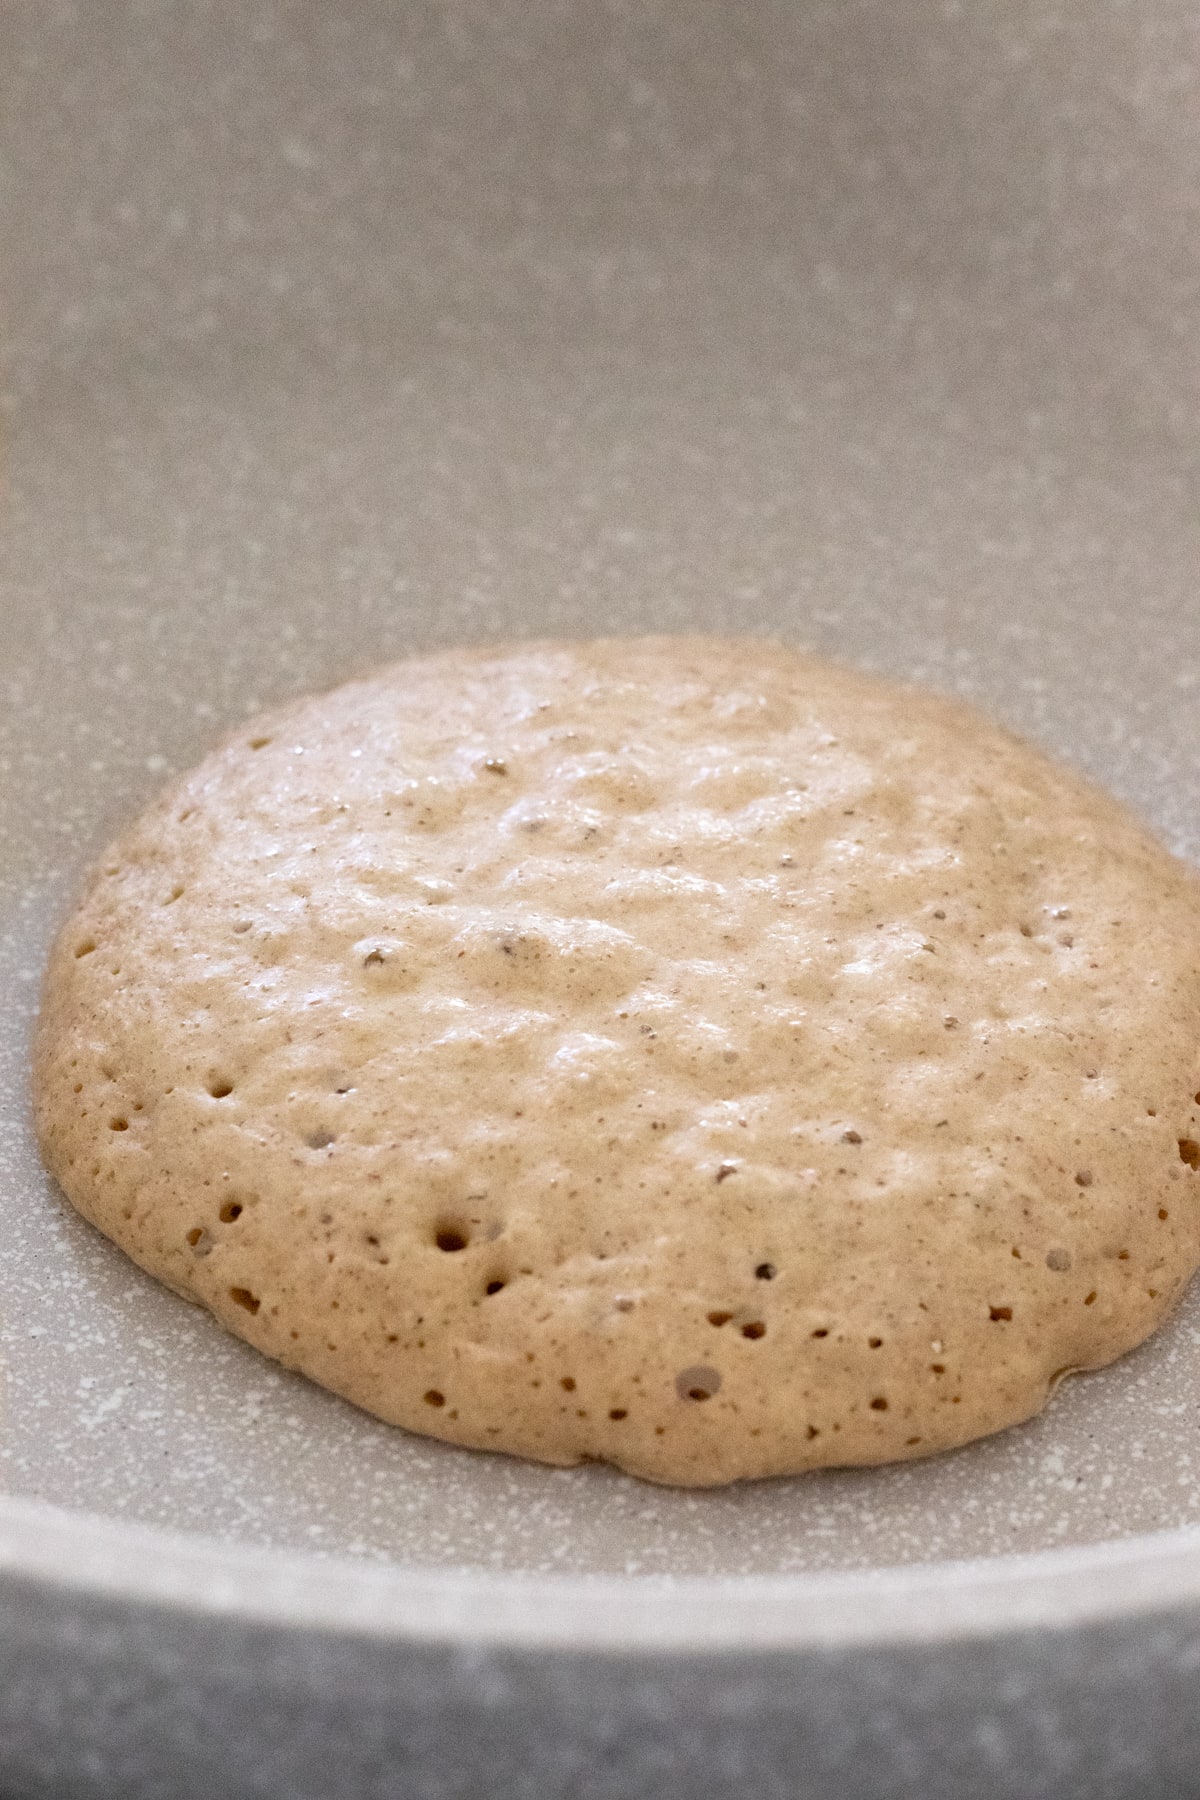 cooking a pancake in a non-stick skillet with brown edges and bubbles on top.